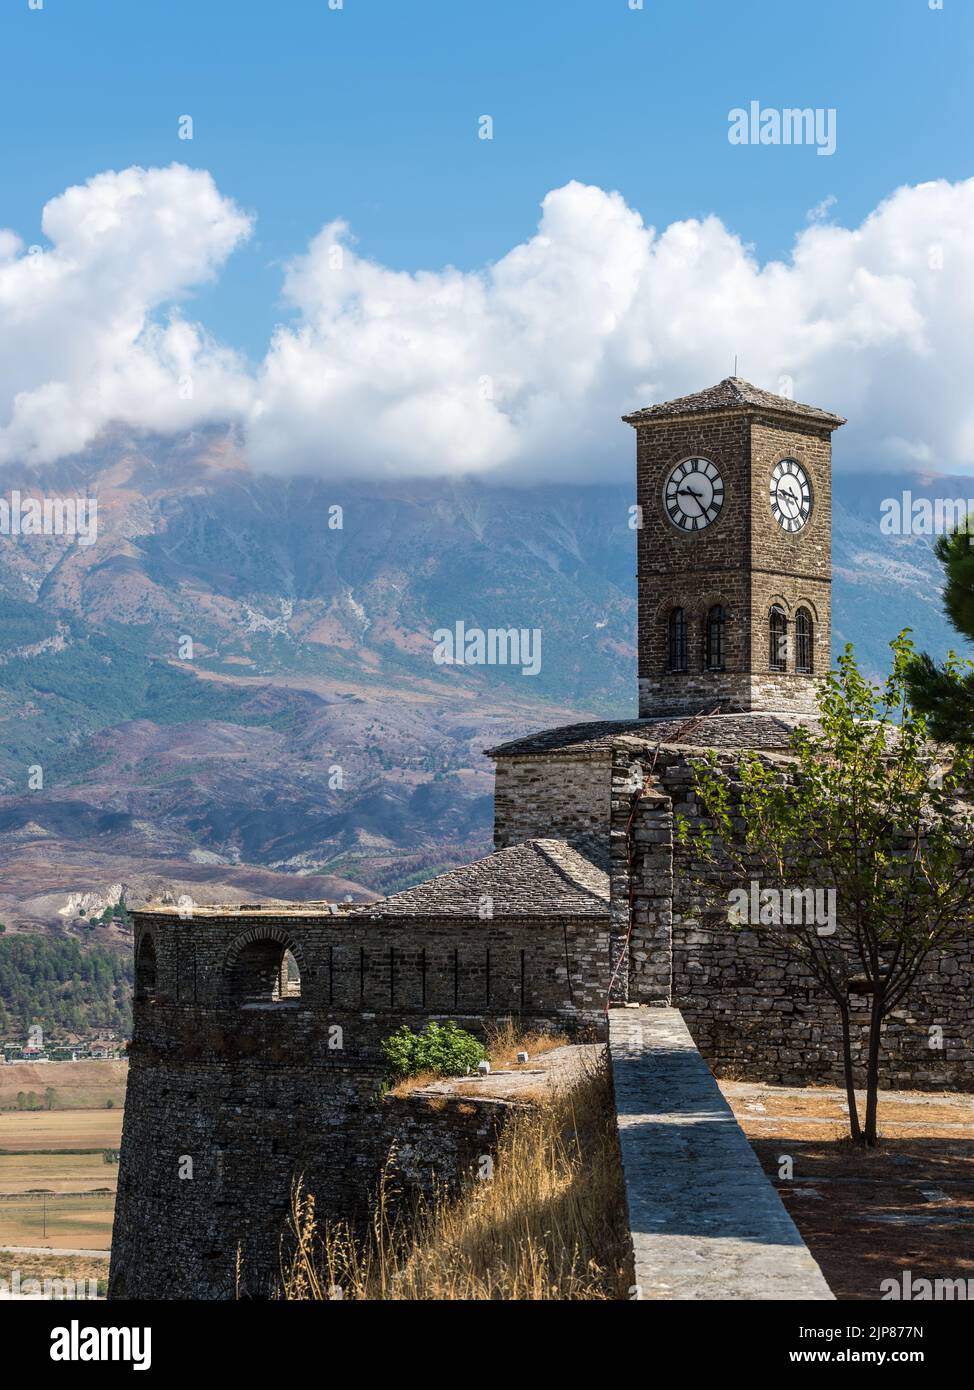 Clock tower and fortress at Gjirokaster, a beautiful town in Albania where the Ottoman legacy is clearly visible Stock Photo